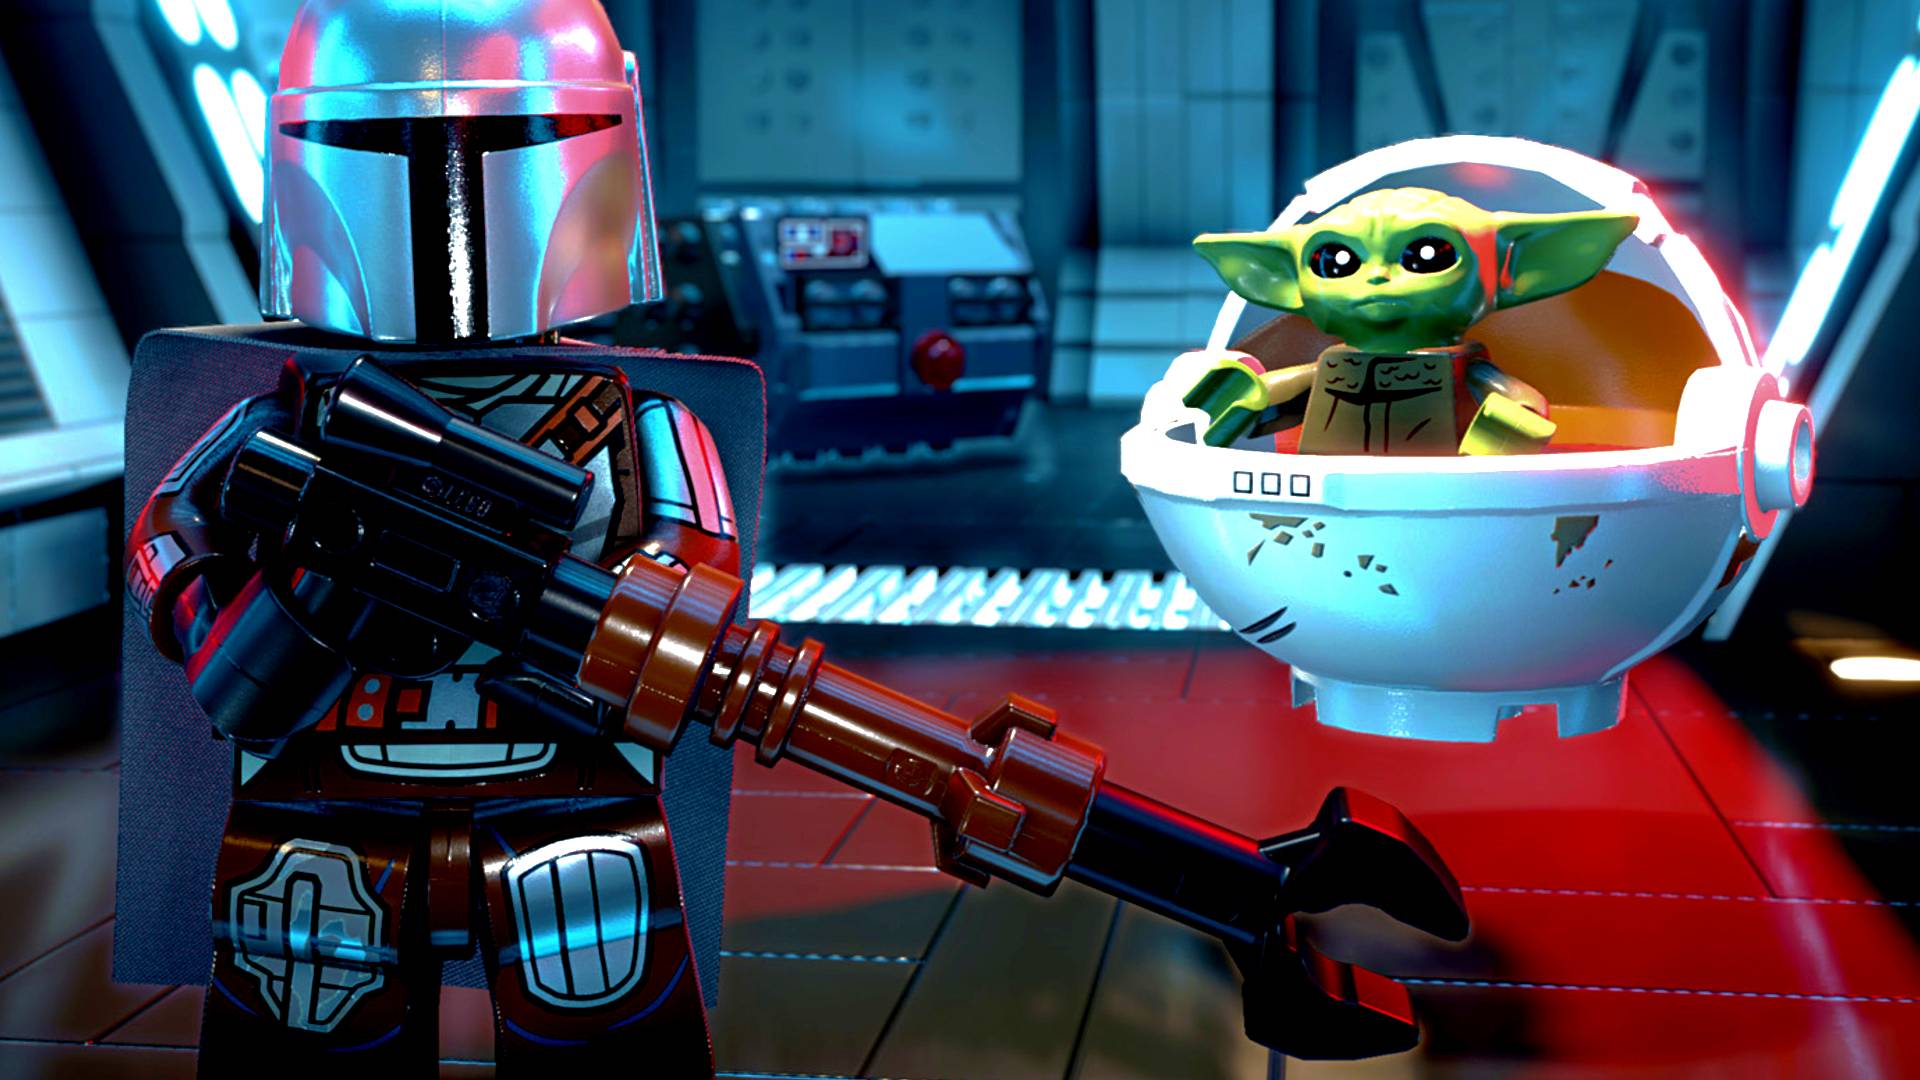 Lego Star Wars The Skywalker Saga DLC, Rogue One, and more